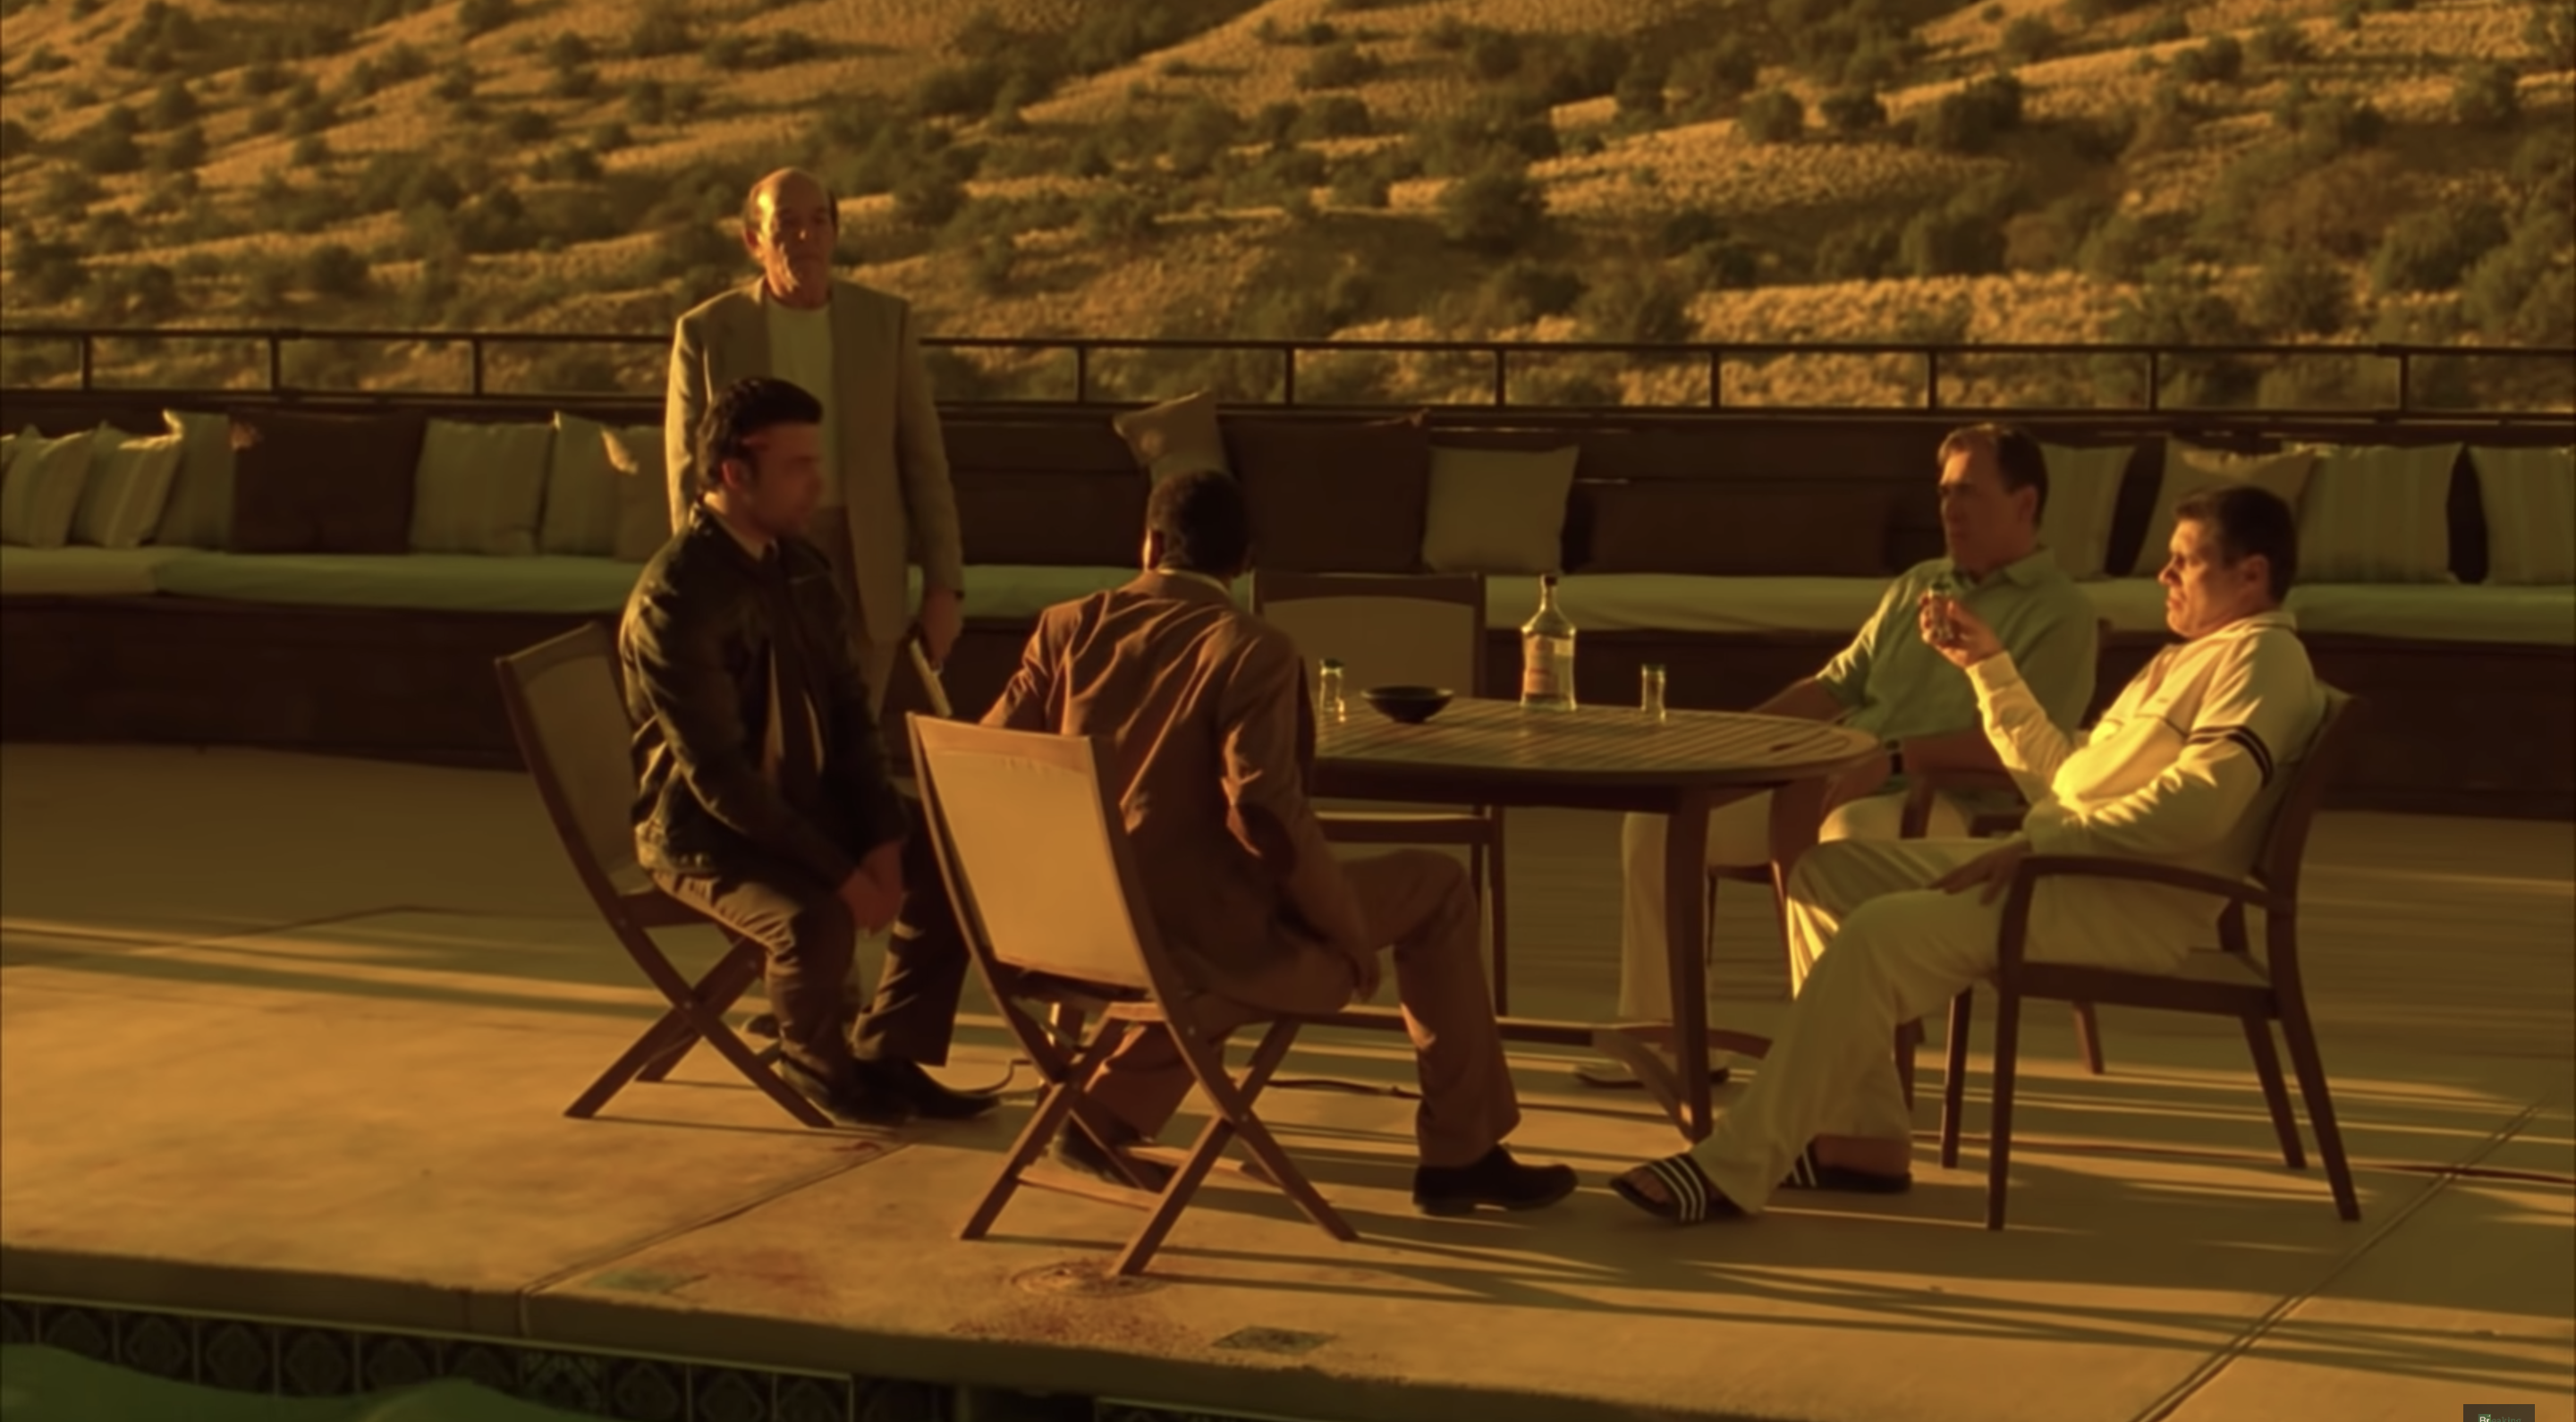 A scene in Mexico from Breaking Bad by a pool